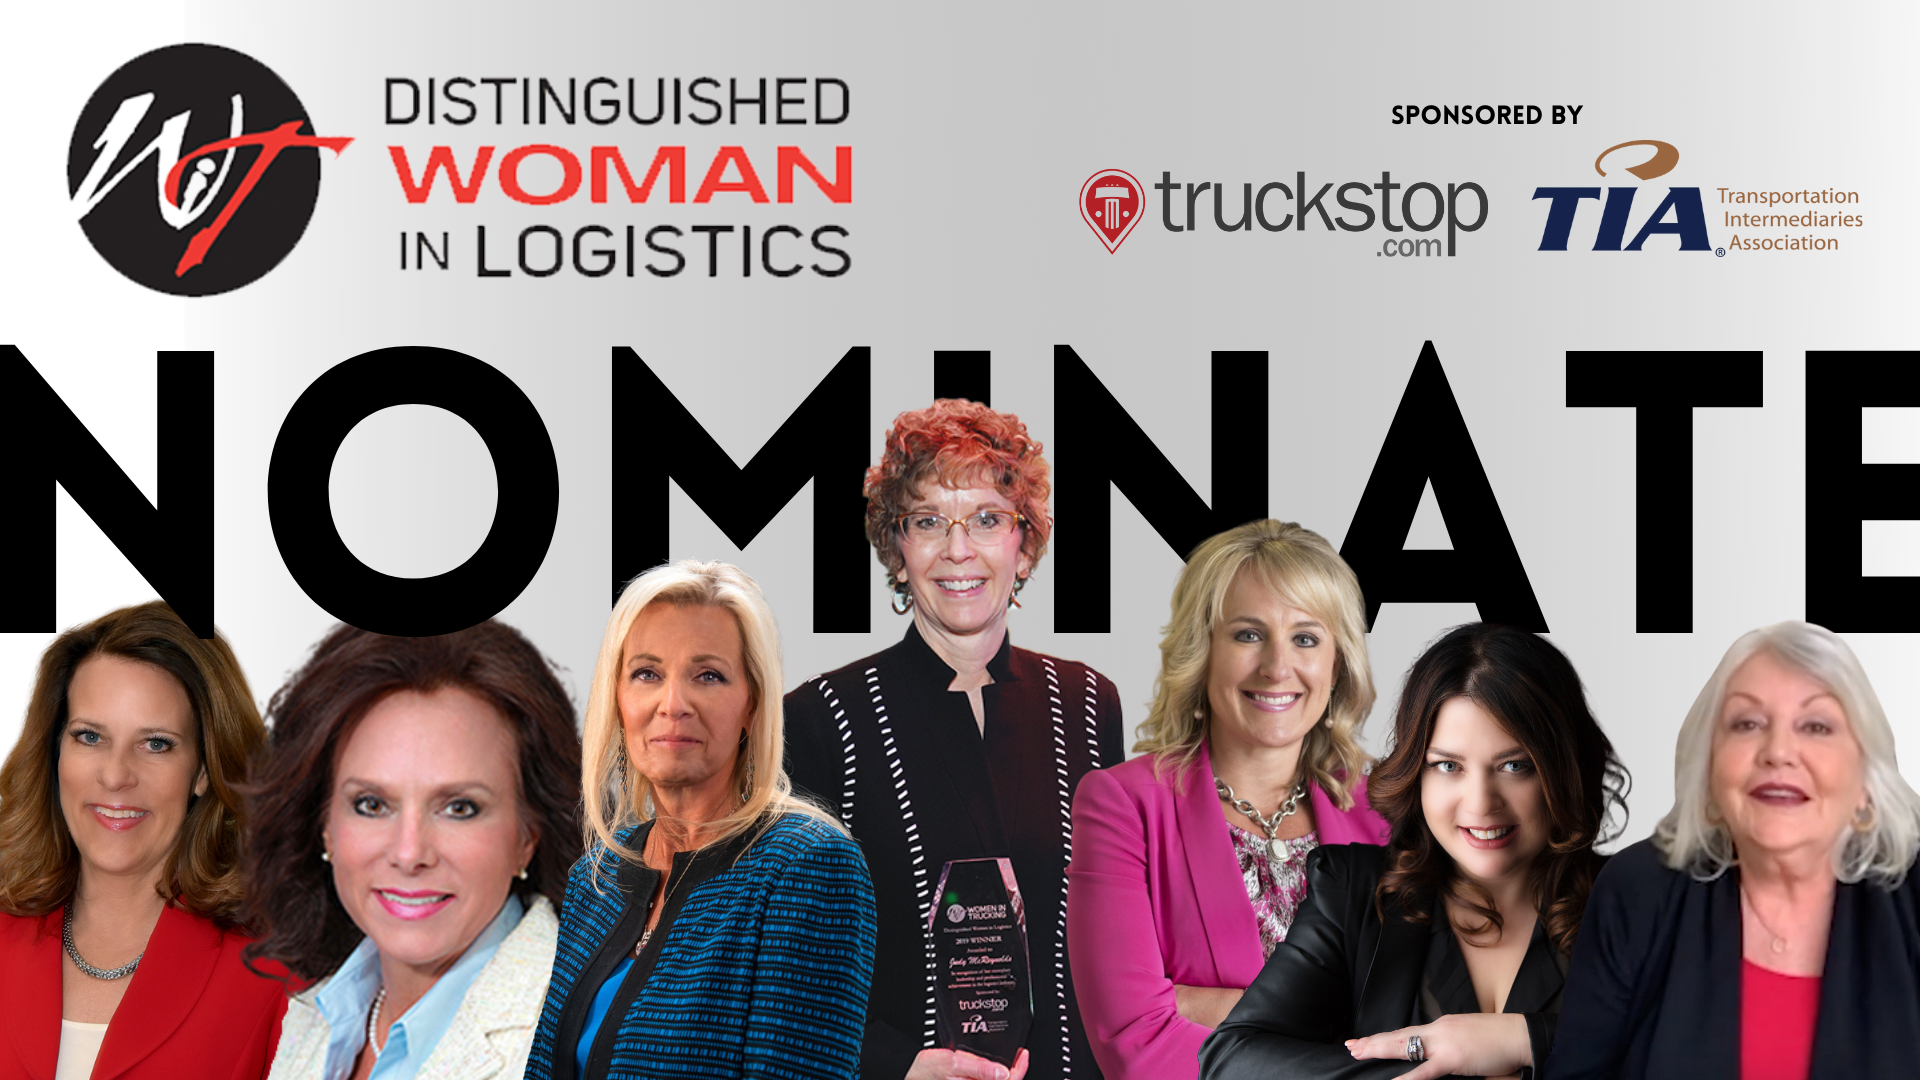 Women In Trucking Association Calls for Nominations for 2022 Distinguished Woman in Logistics Award